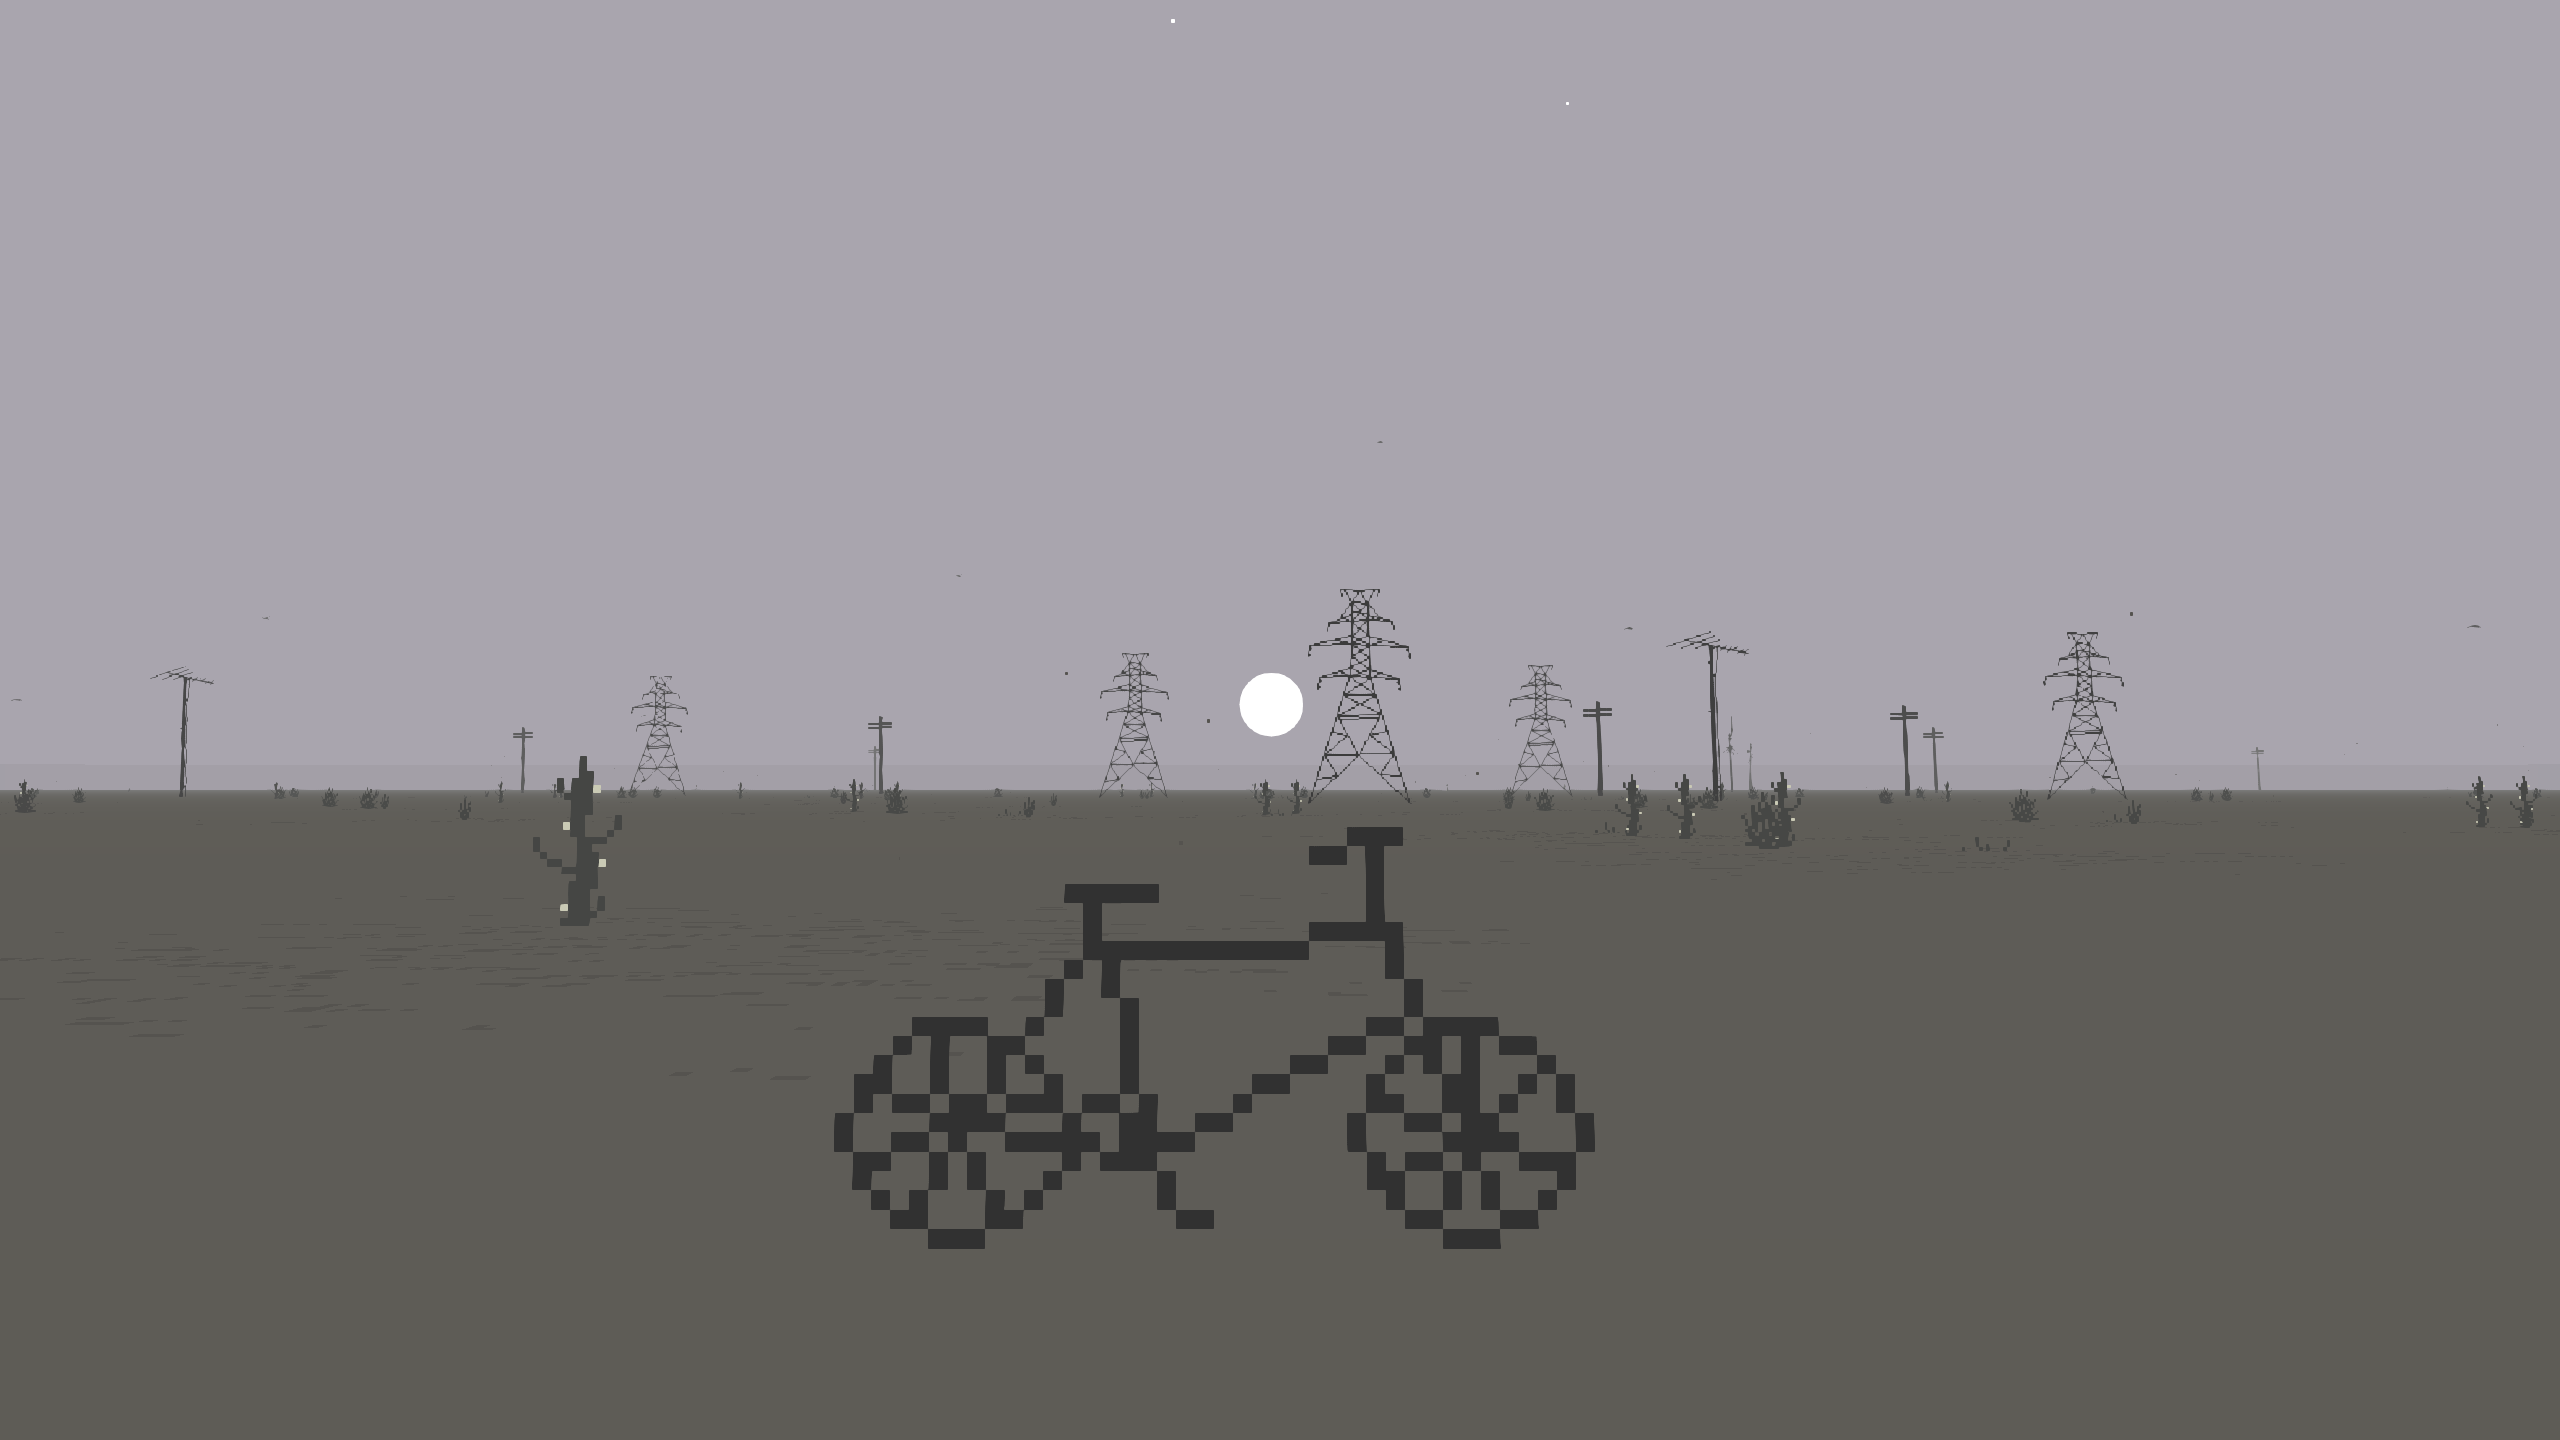 A bicycle stands in a grey desert full of pylons and antenna in a Bird Snapper screenshot.